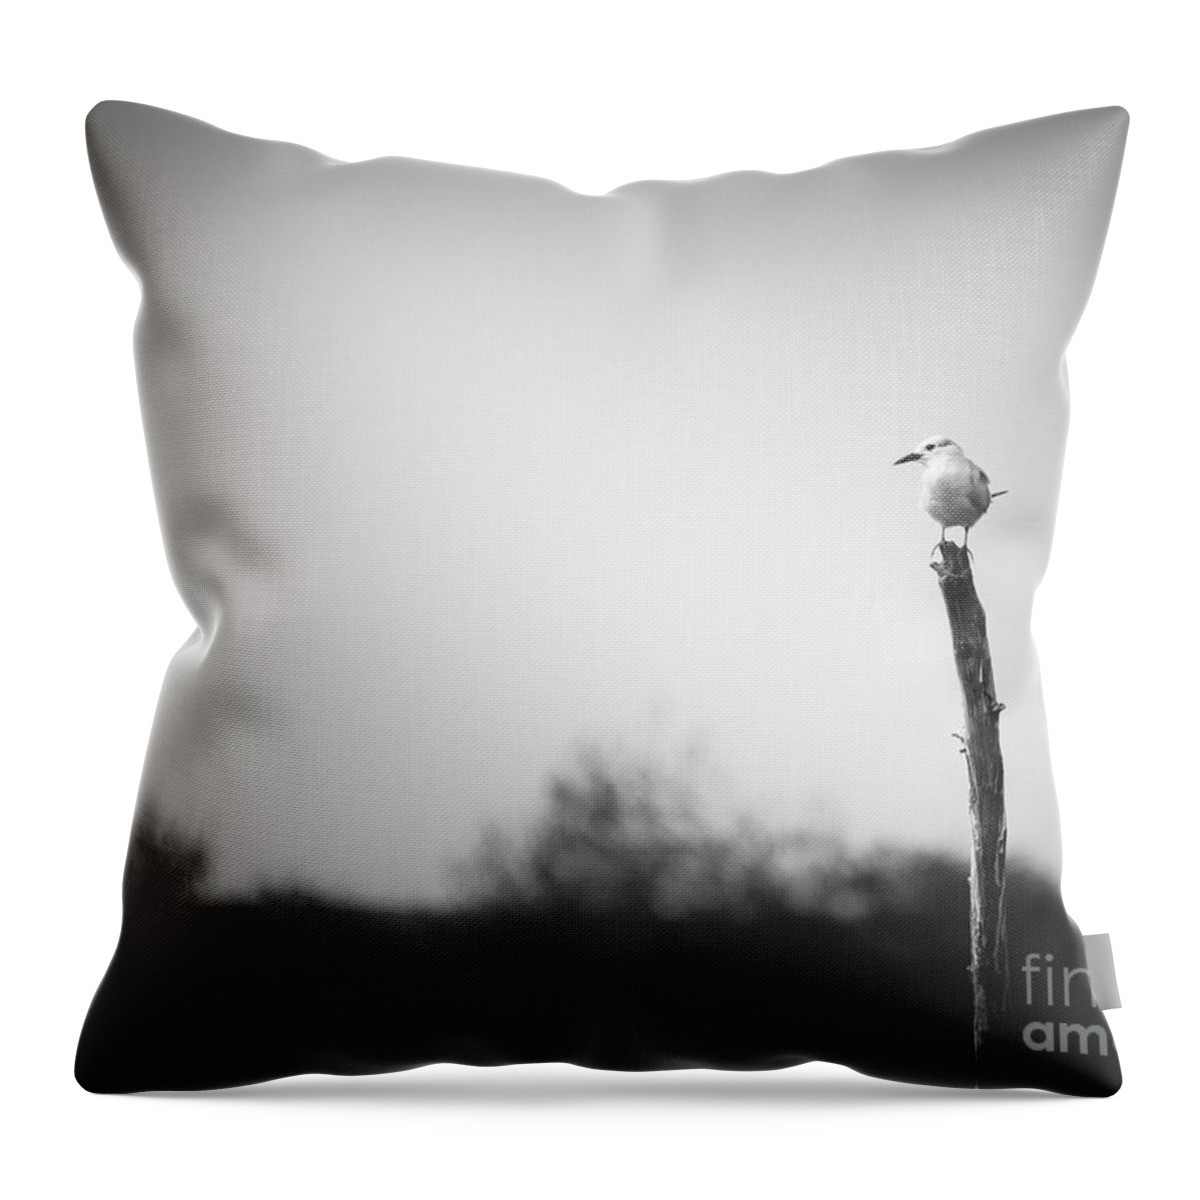 #look # Eyes #birds #feathers #eyes #color #colour #blackandwhite #b&w Throw Pillow featuring the photograph On a Stick by Dheeraj Mutha